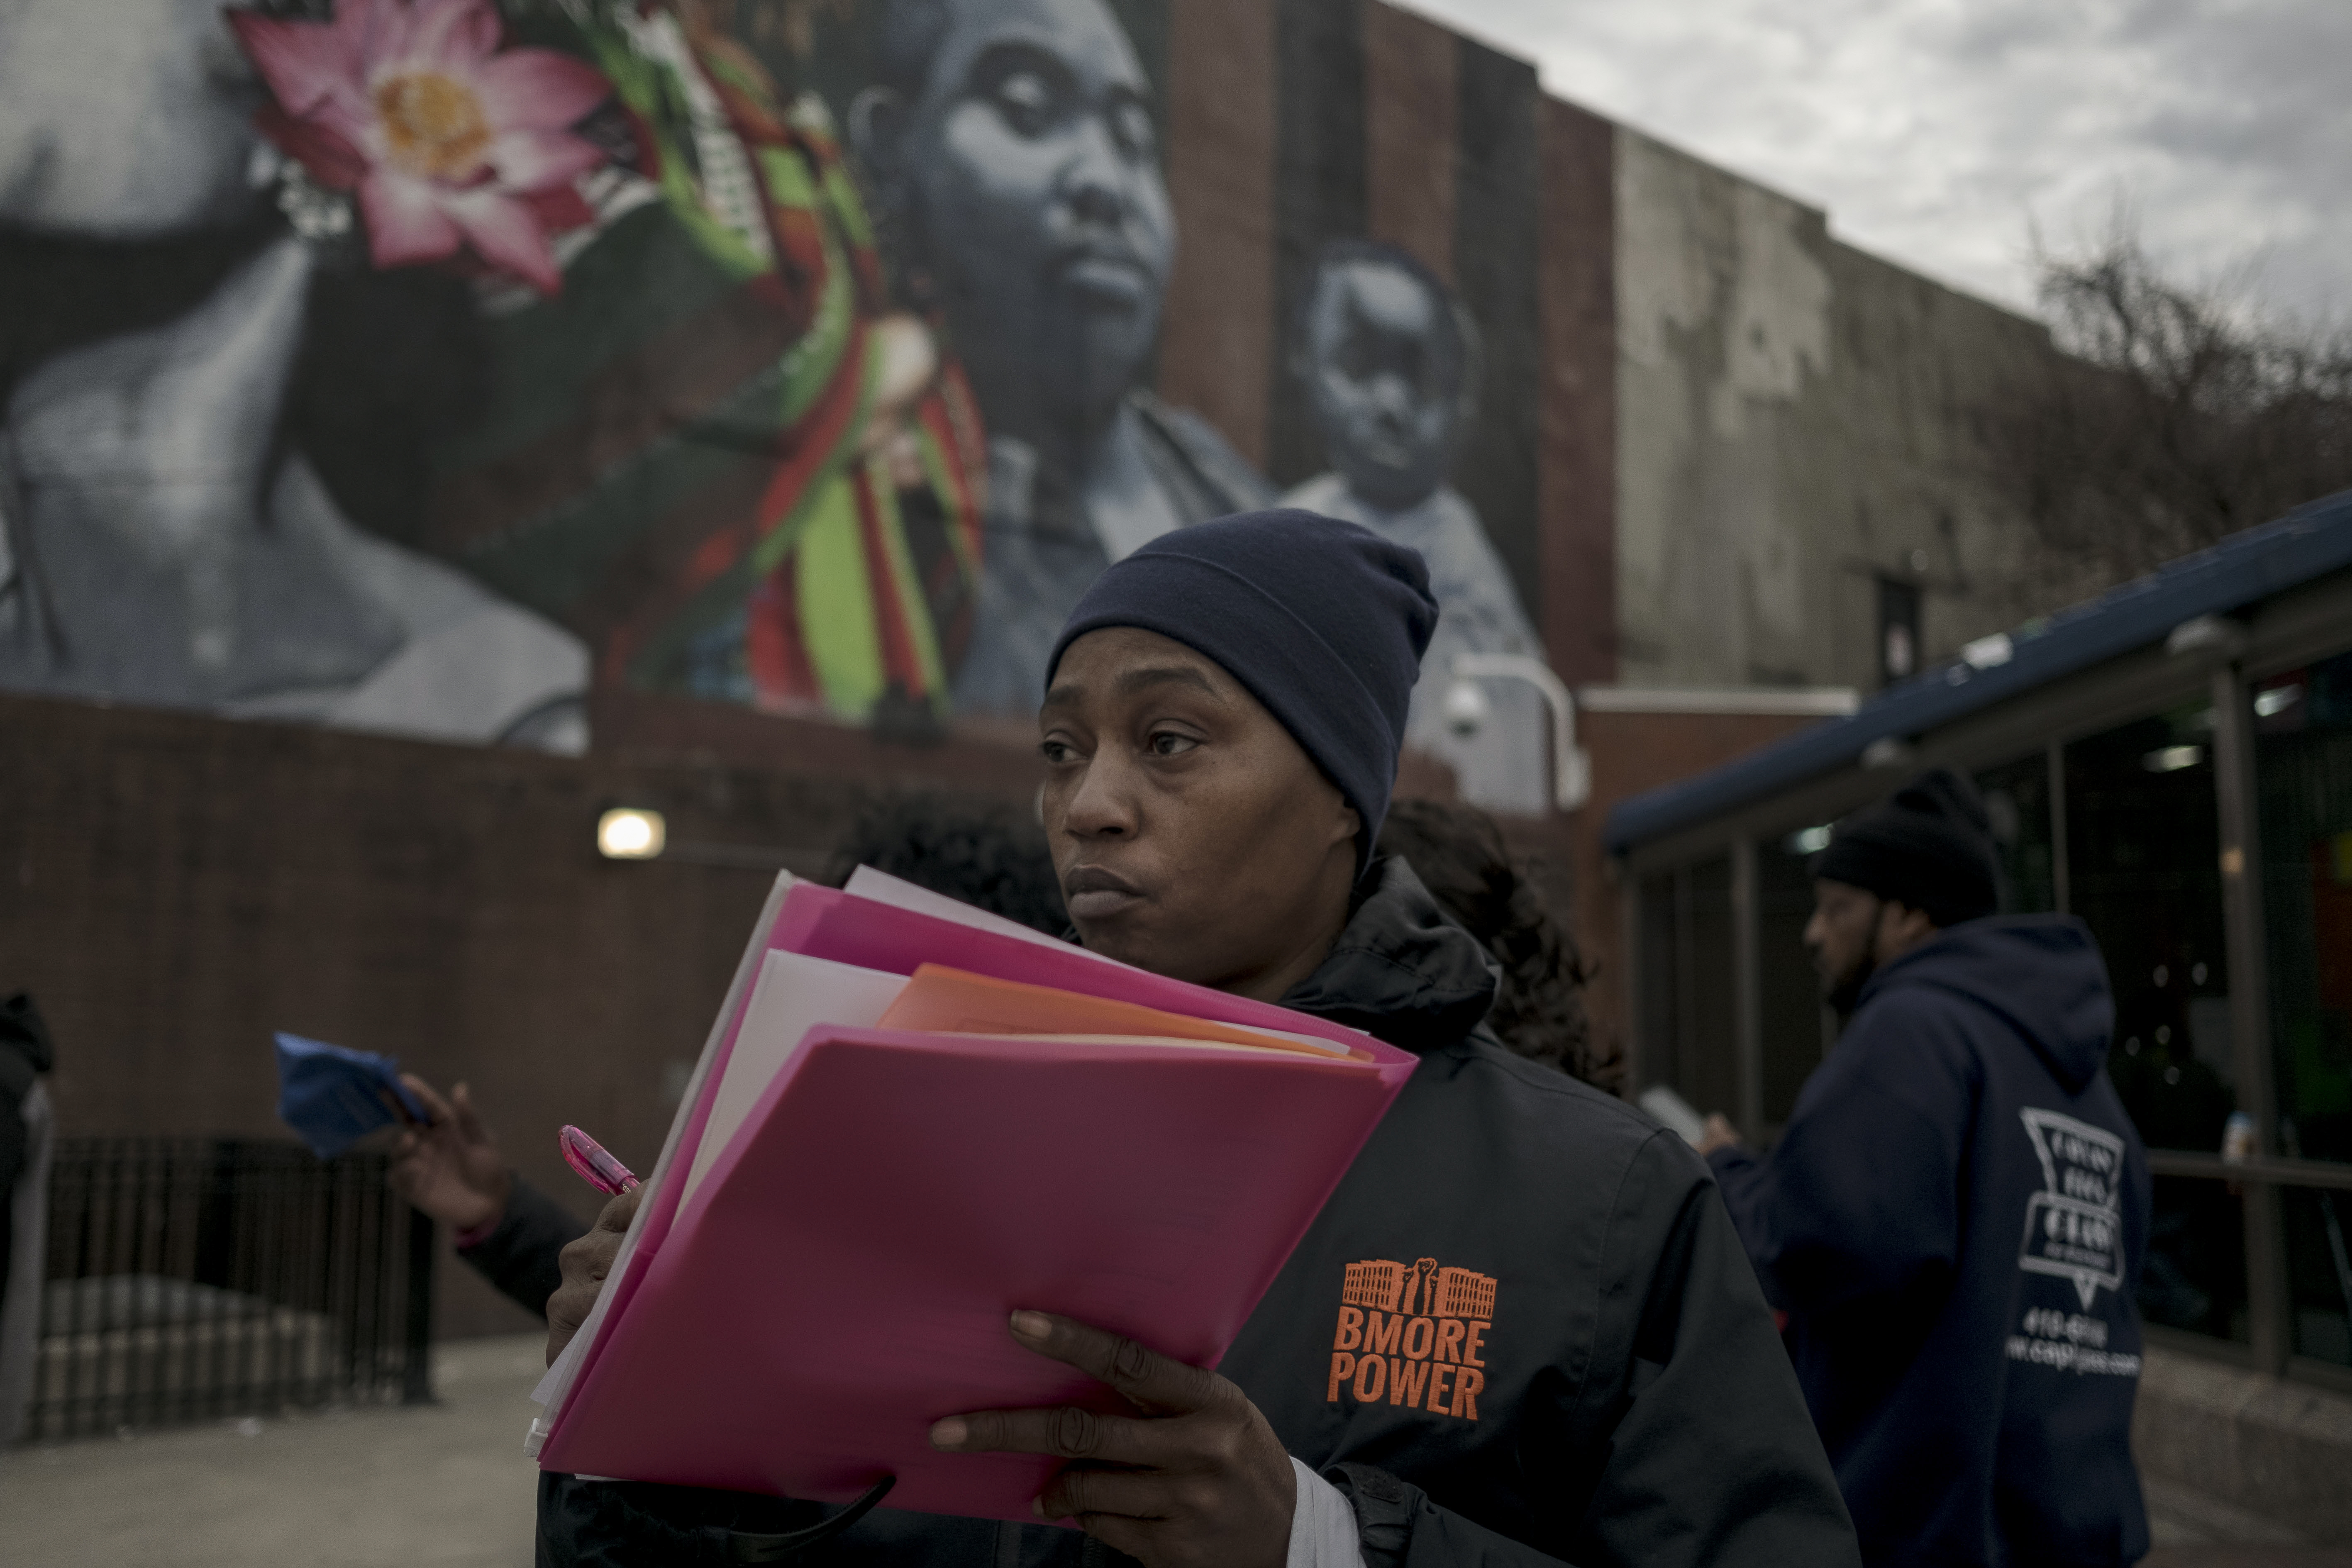 Raichelle “Ro” Johnson with Bmore POWER hands out the opioid overdose antidote naloxone and fentanyl testing strips in West Baltimore, Maryland, on March 13, 2019. Baltimore has seen a dramatic increase in drug overdose deaths in recent years.